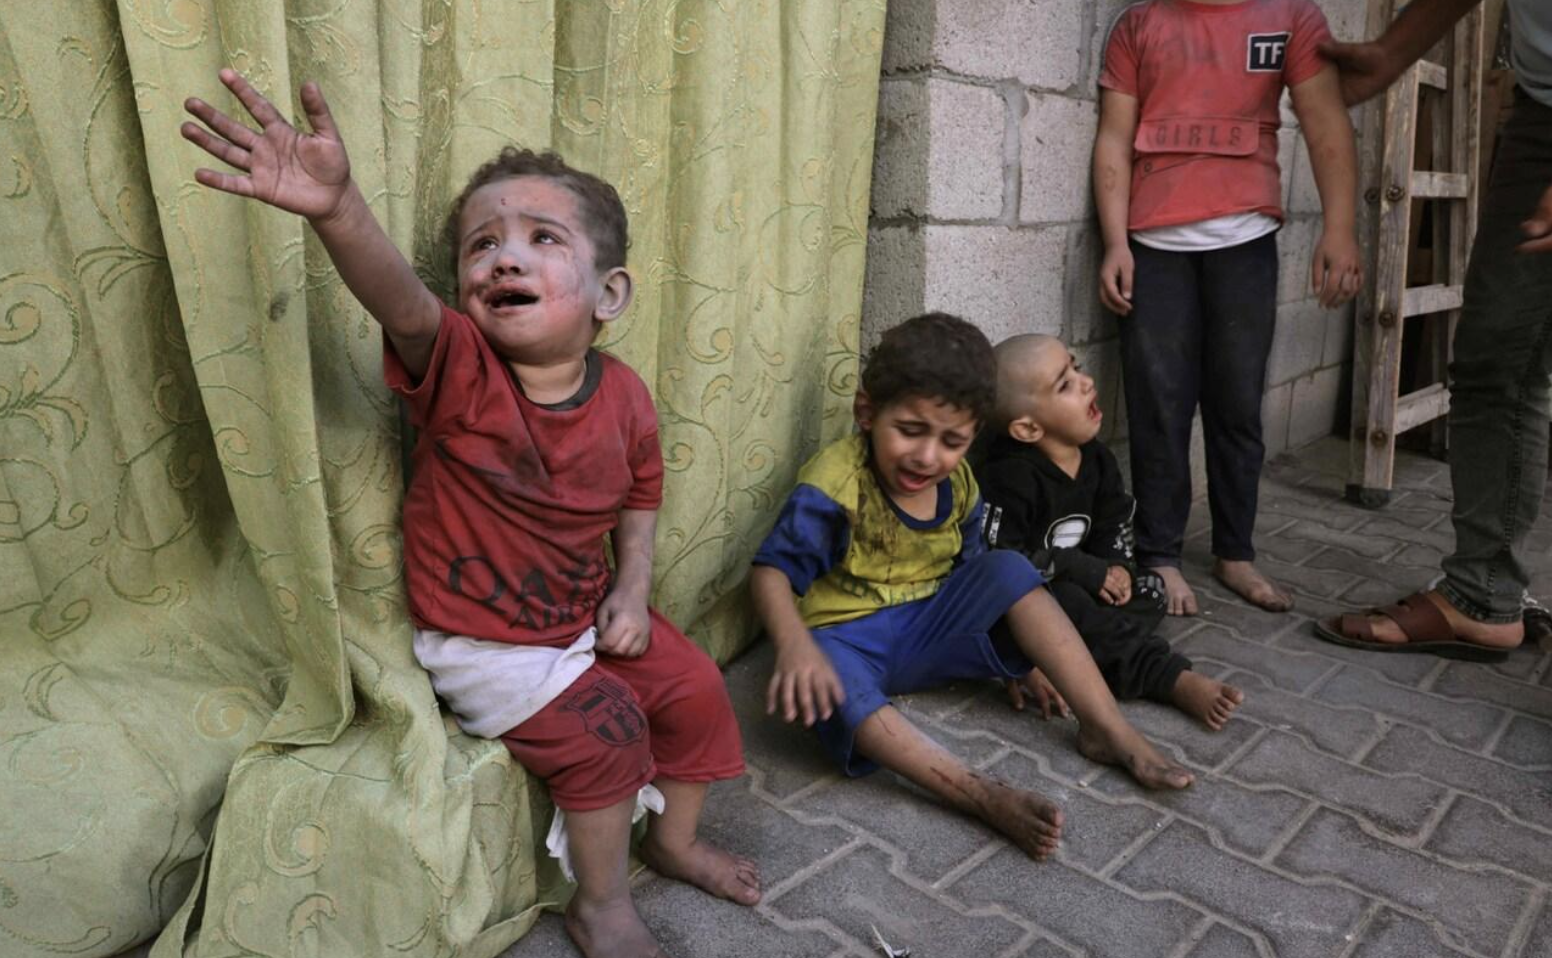 Palestinian children covered in dust from an Israeli air strike sit in the grounds of a hospital in Rafah CREDIT: MOHAMMED ABED/AFP via Getty Images